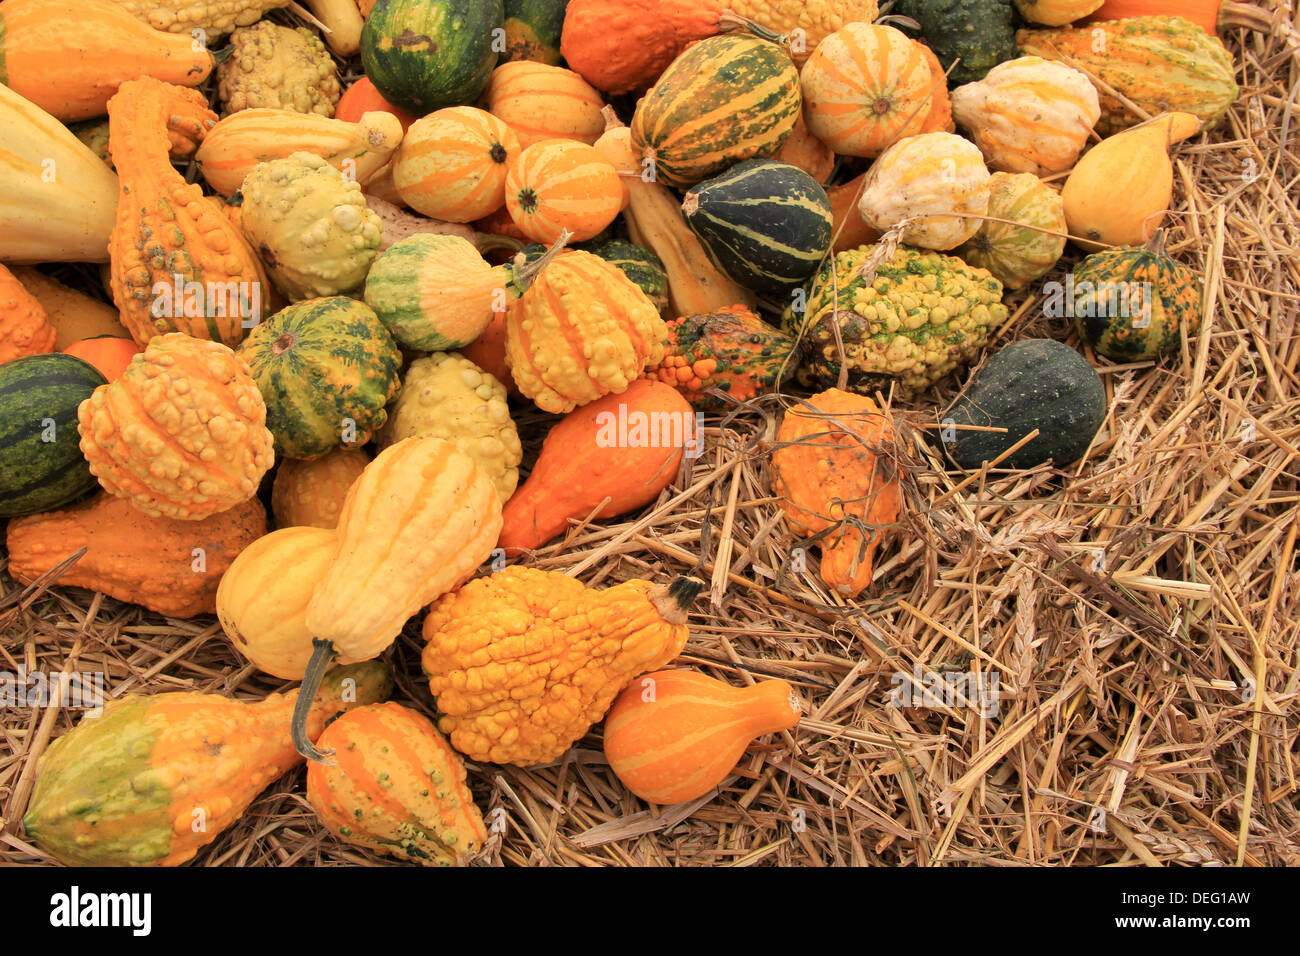 Large table with display of colorful Fall gourds, a variety of many shapes and colors arranged on bed of straw at outdoor farmers market. Stock Photo